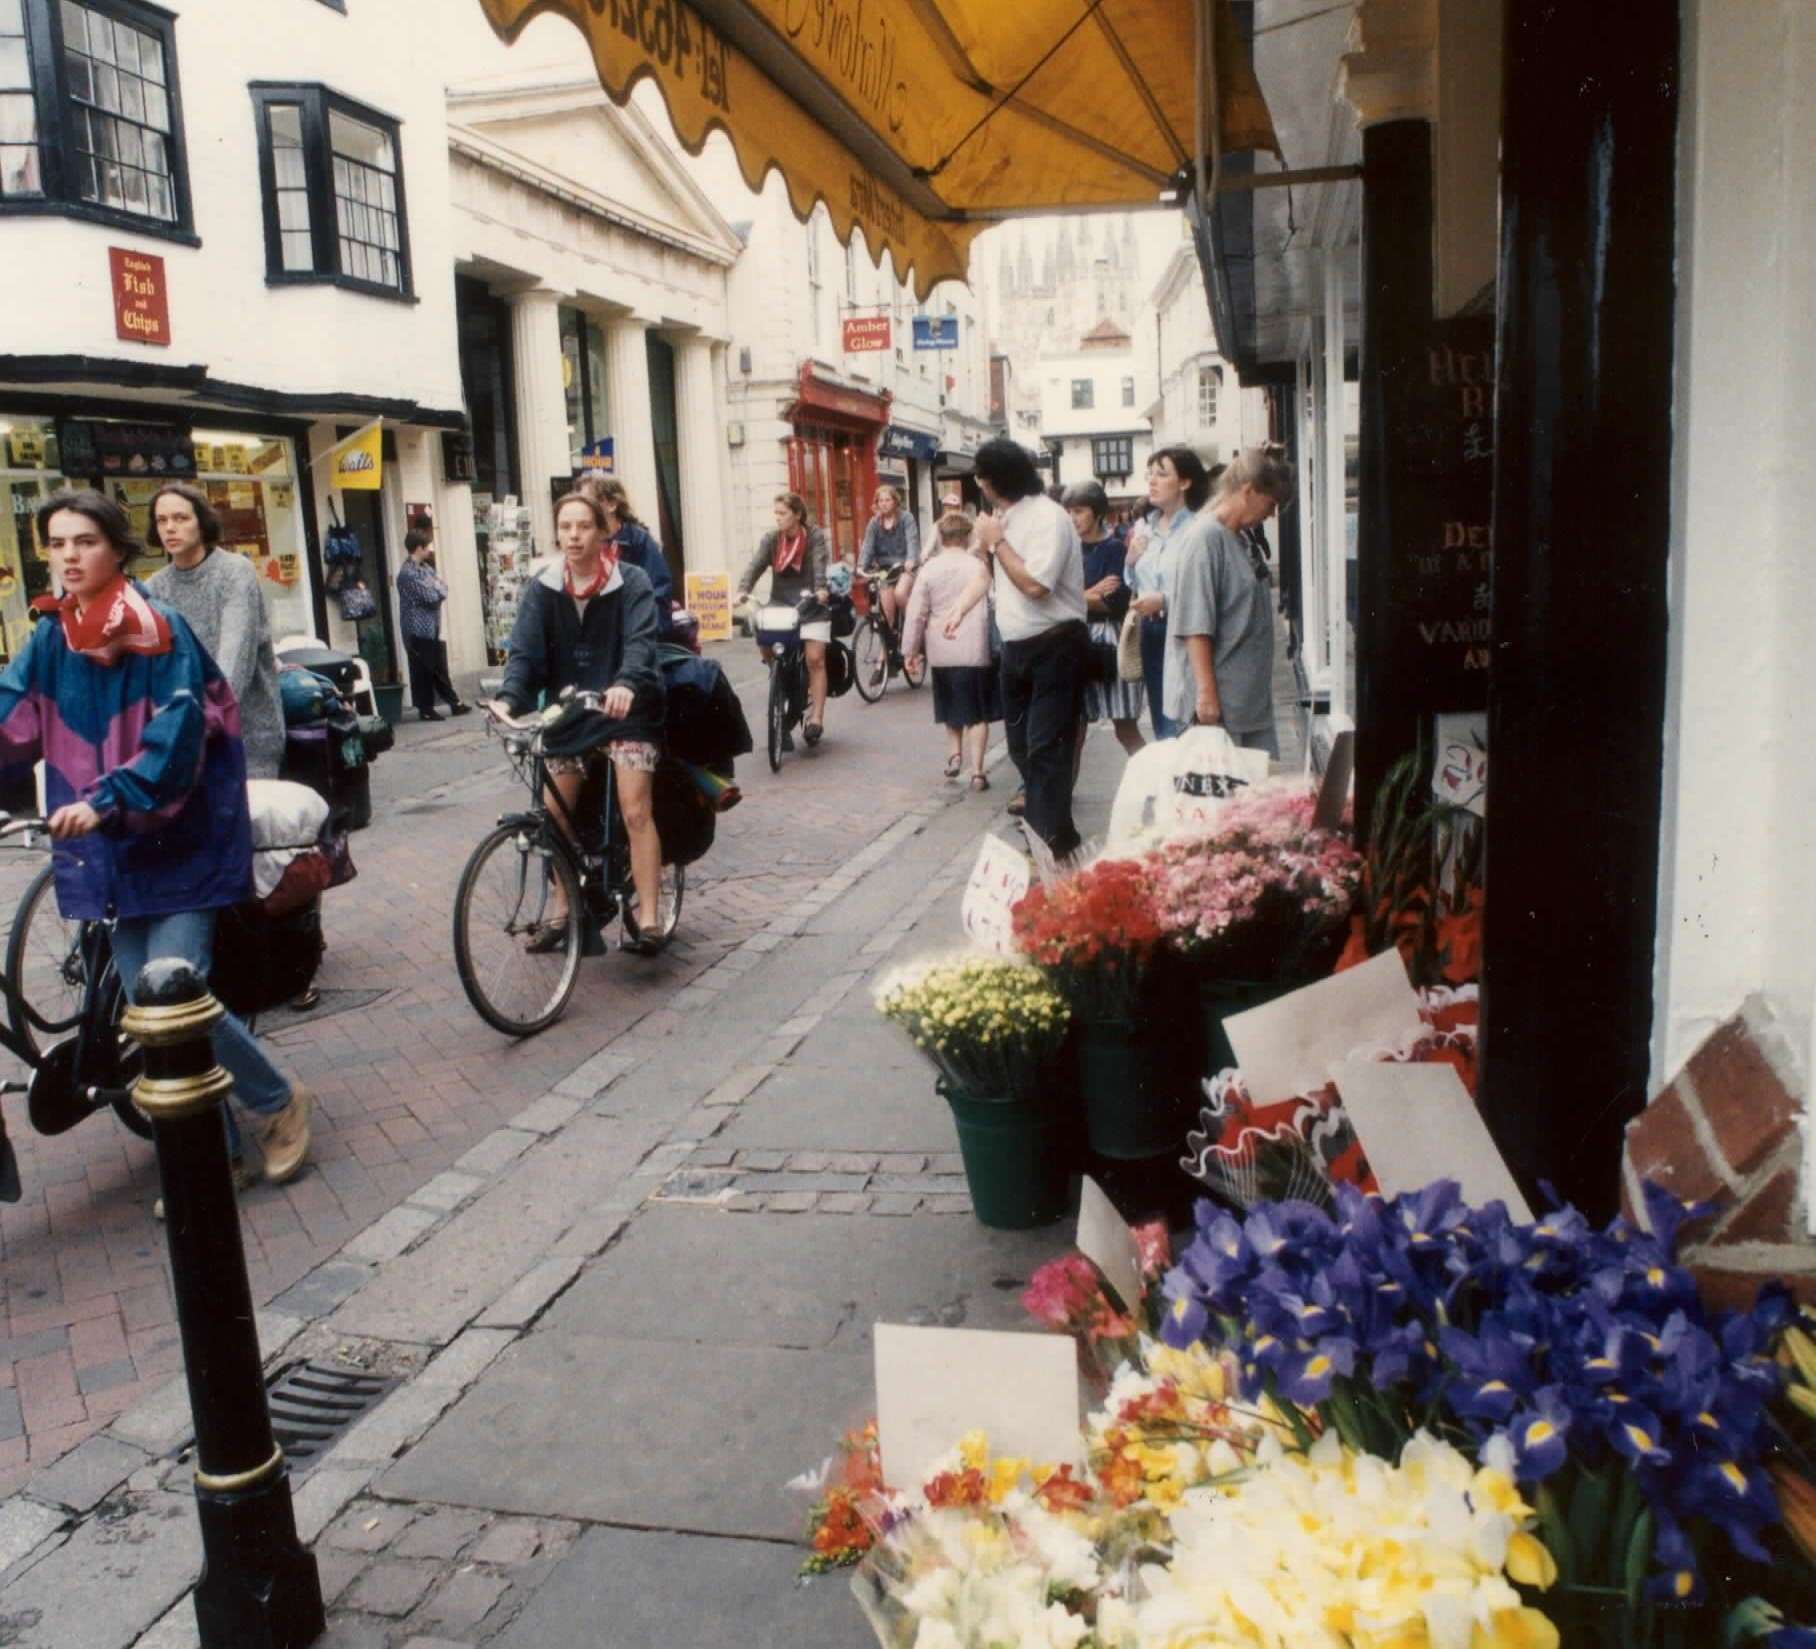 St Margaret's Street, Canterbury, in 1996. The Amber Glow shop has since become Angel’s body piercing studio, while the premises next door is now occupied by L’Occitane boutique. The bouquets on the right of the picture were being sold by Interflora Flowers World Wide which has since been replaced by Marlowe Florists.